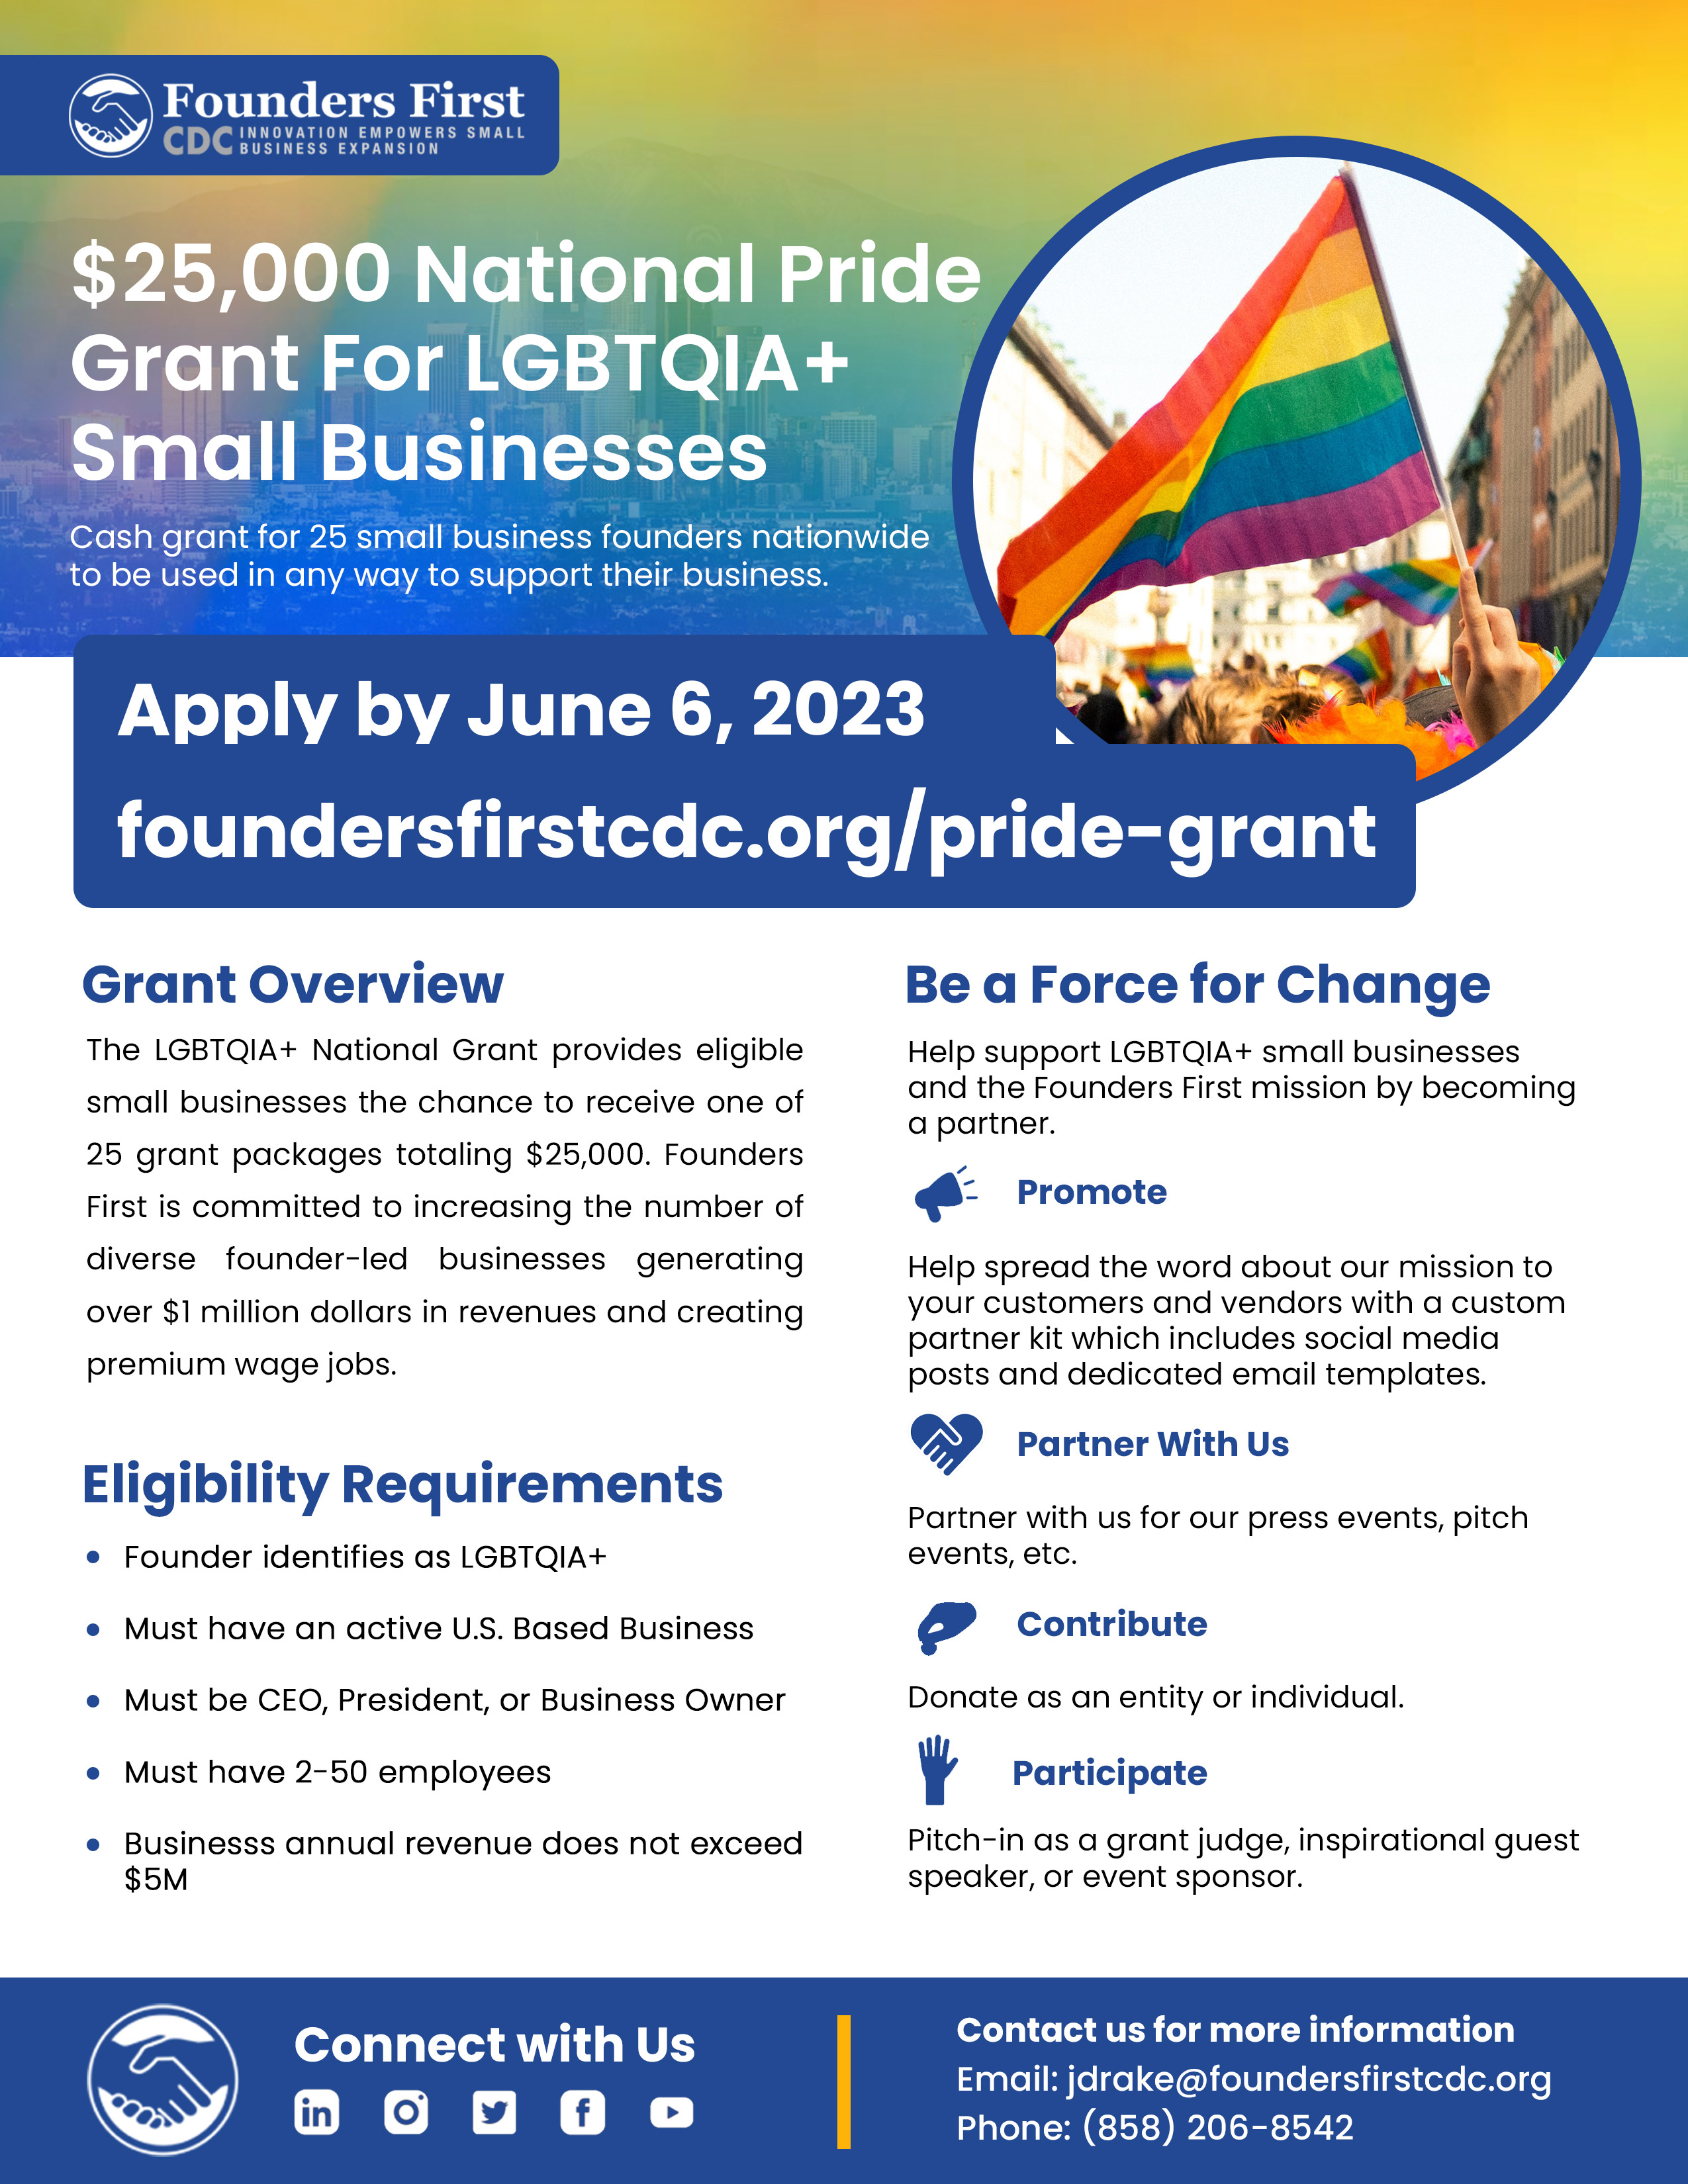 The LGBTQIA+ National Grant allows eligible small businesses to receive one of 25 grants totaling $25,000.